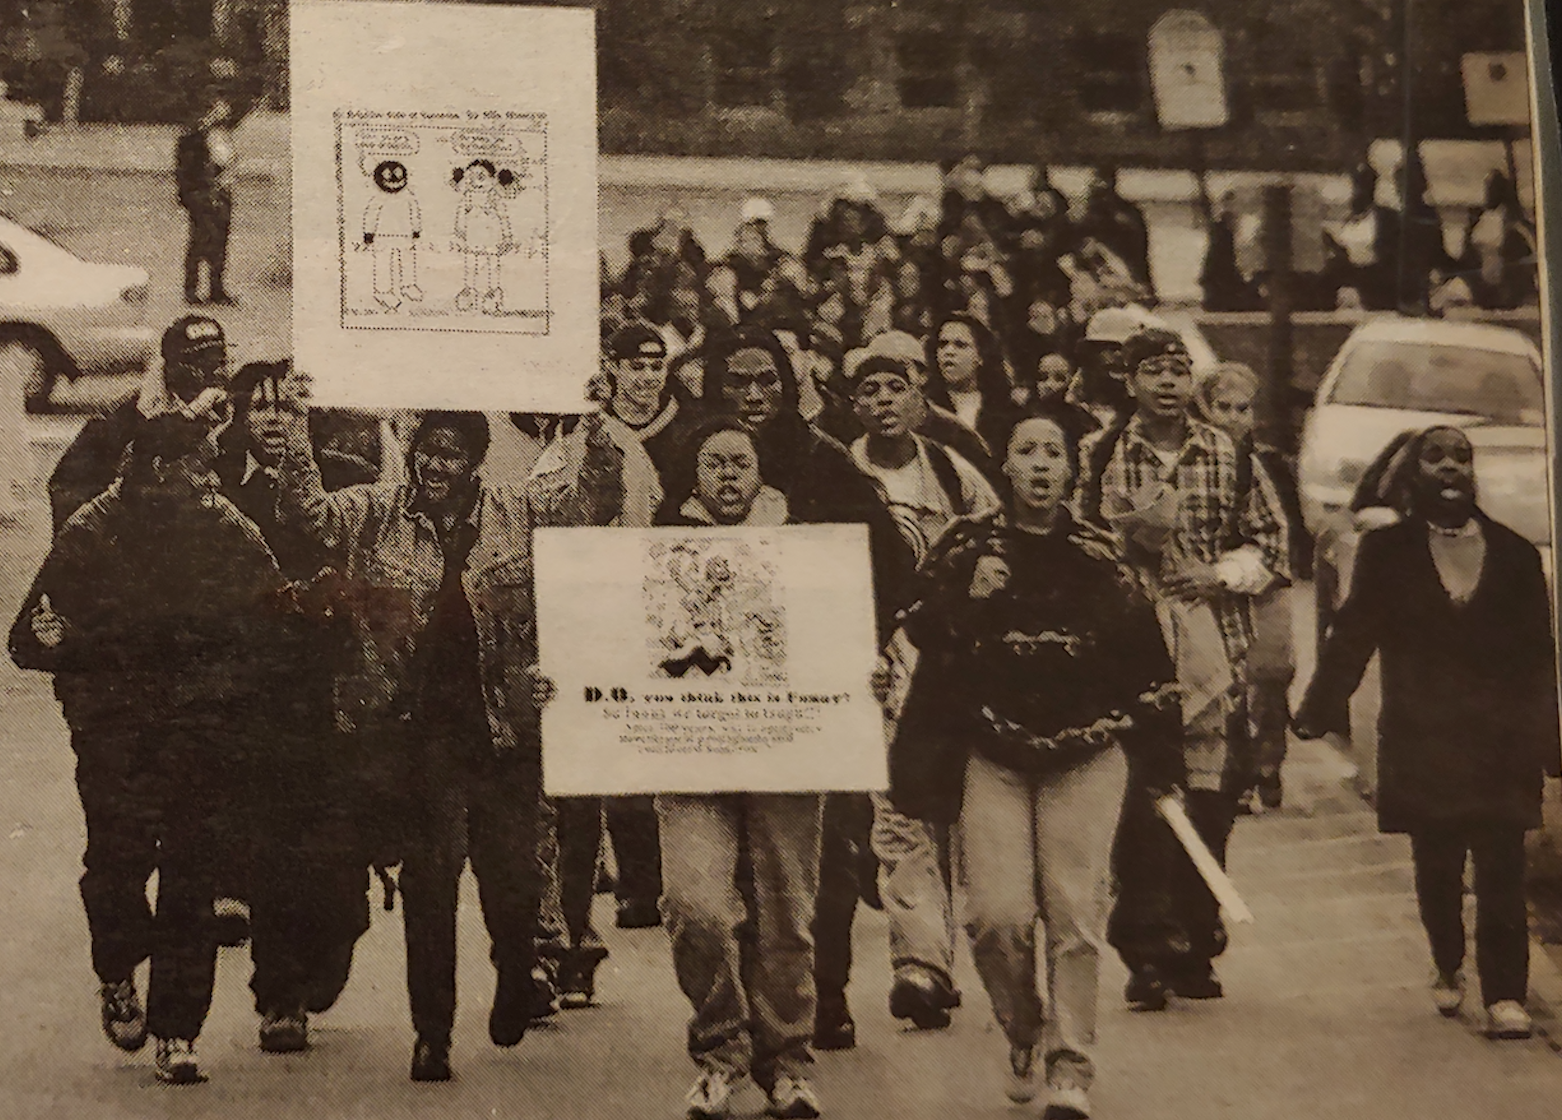 20th Anniversary of the [d.o.] Protest at Syracuse University